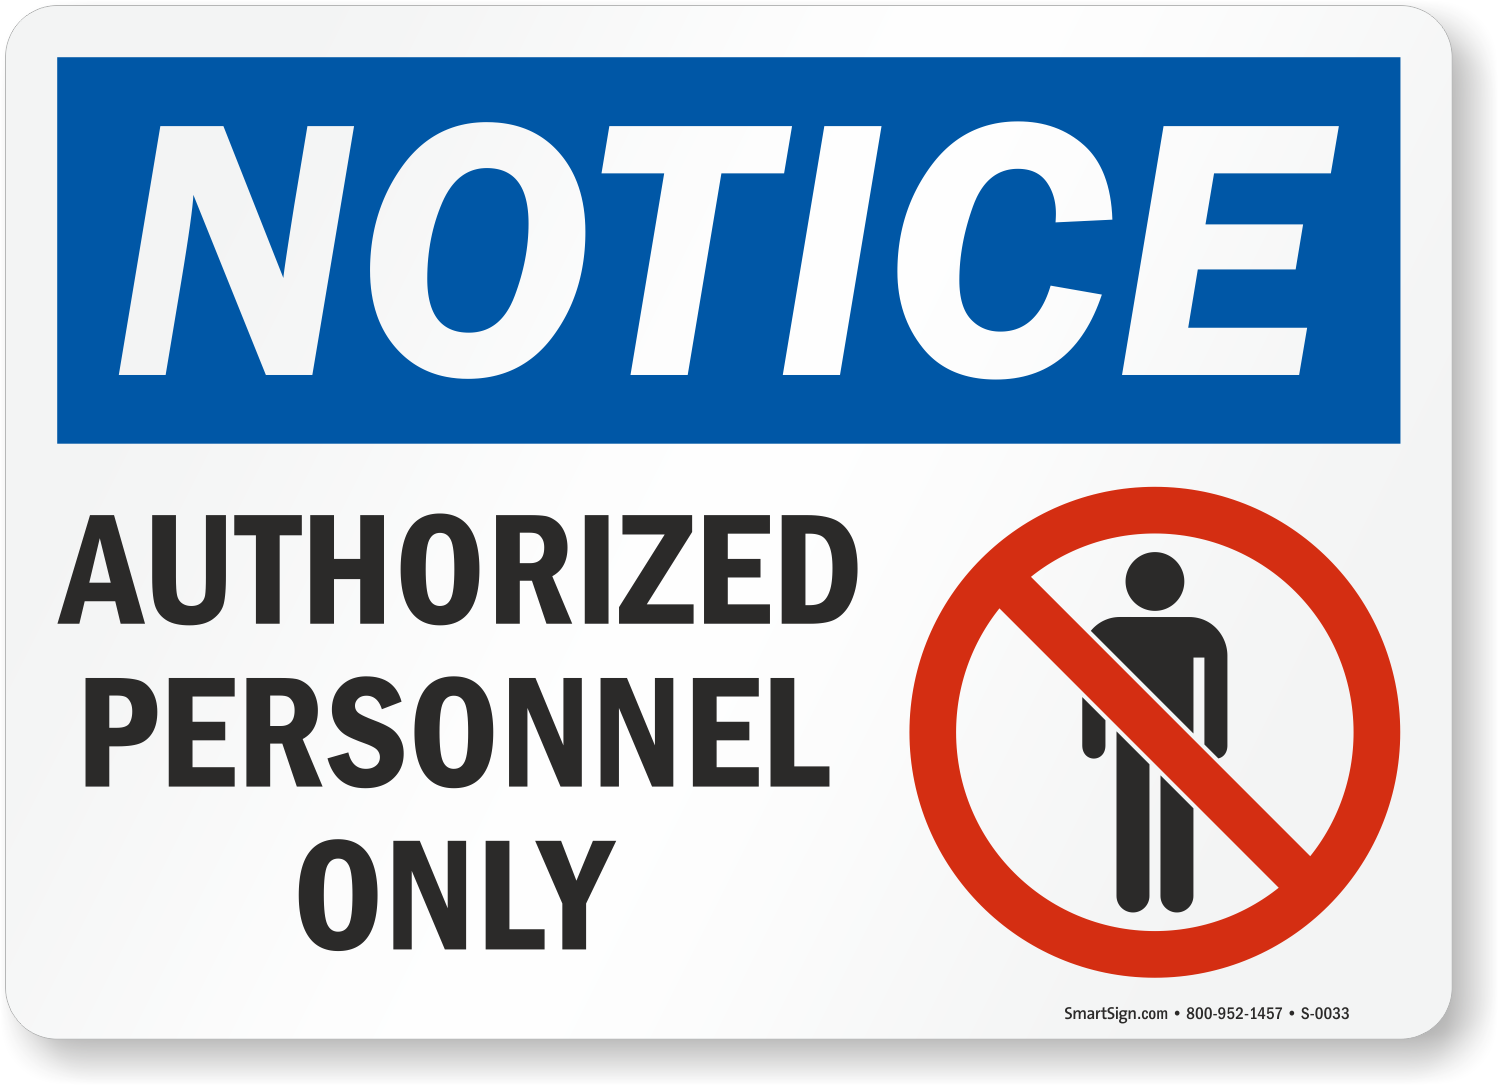 Authorized Personnel Sign With Graphic Made In USA, SKU S0033